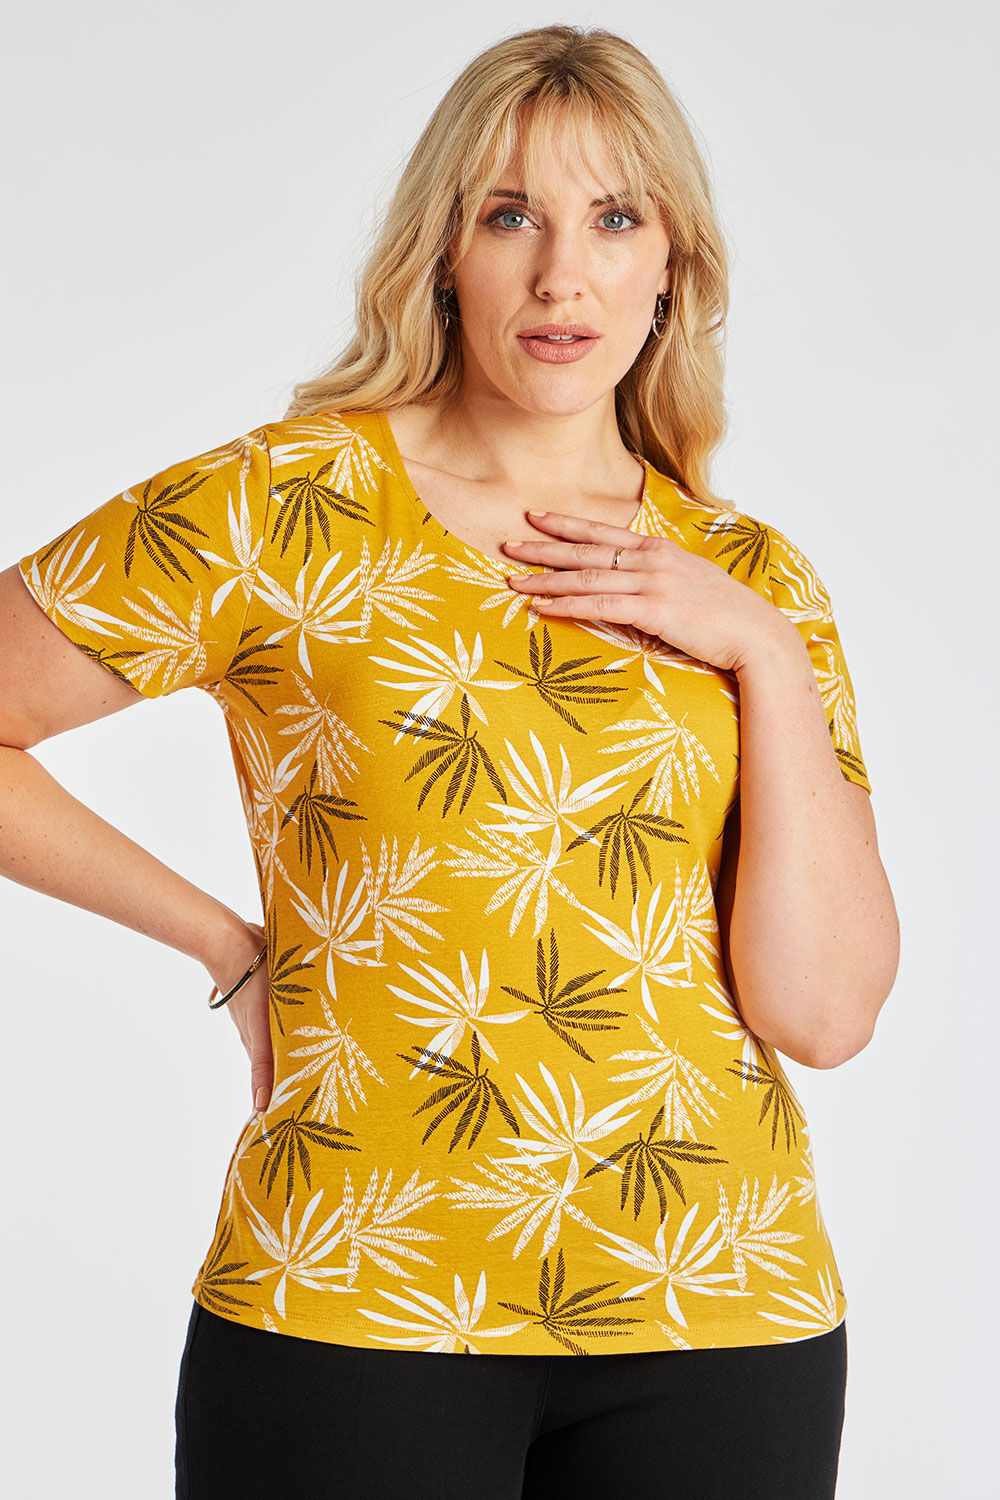 Bonmarche Yellow Short Sleeve Palm Print T-Shirt With Scoop Neckline, Size: 14